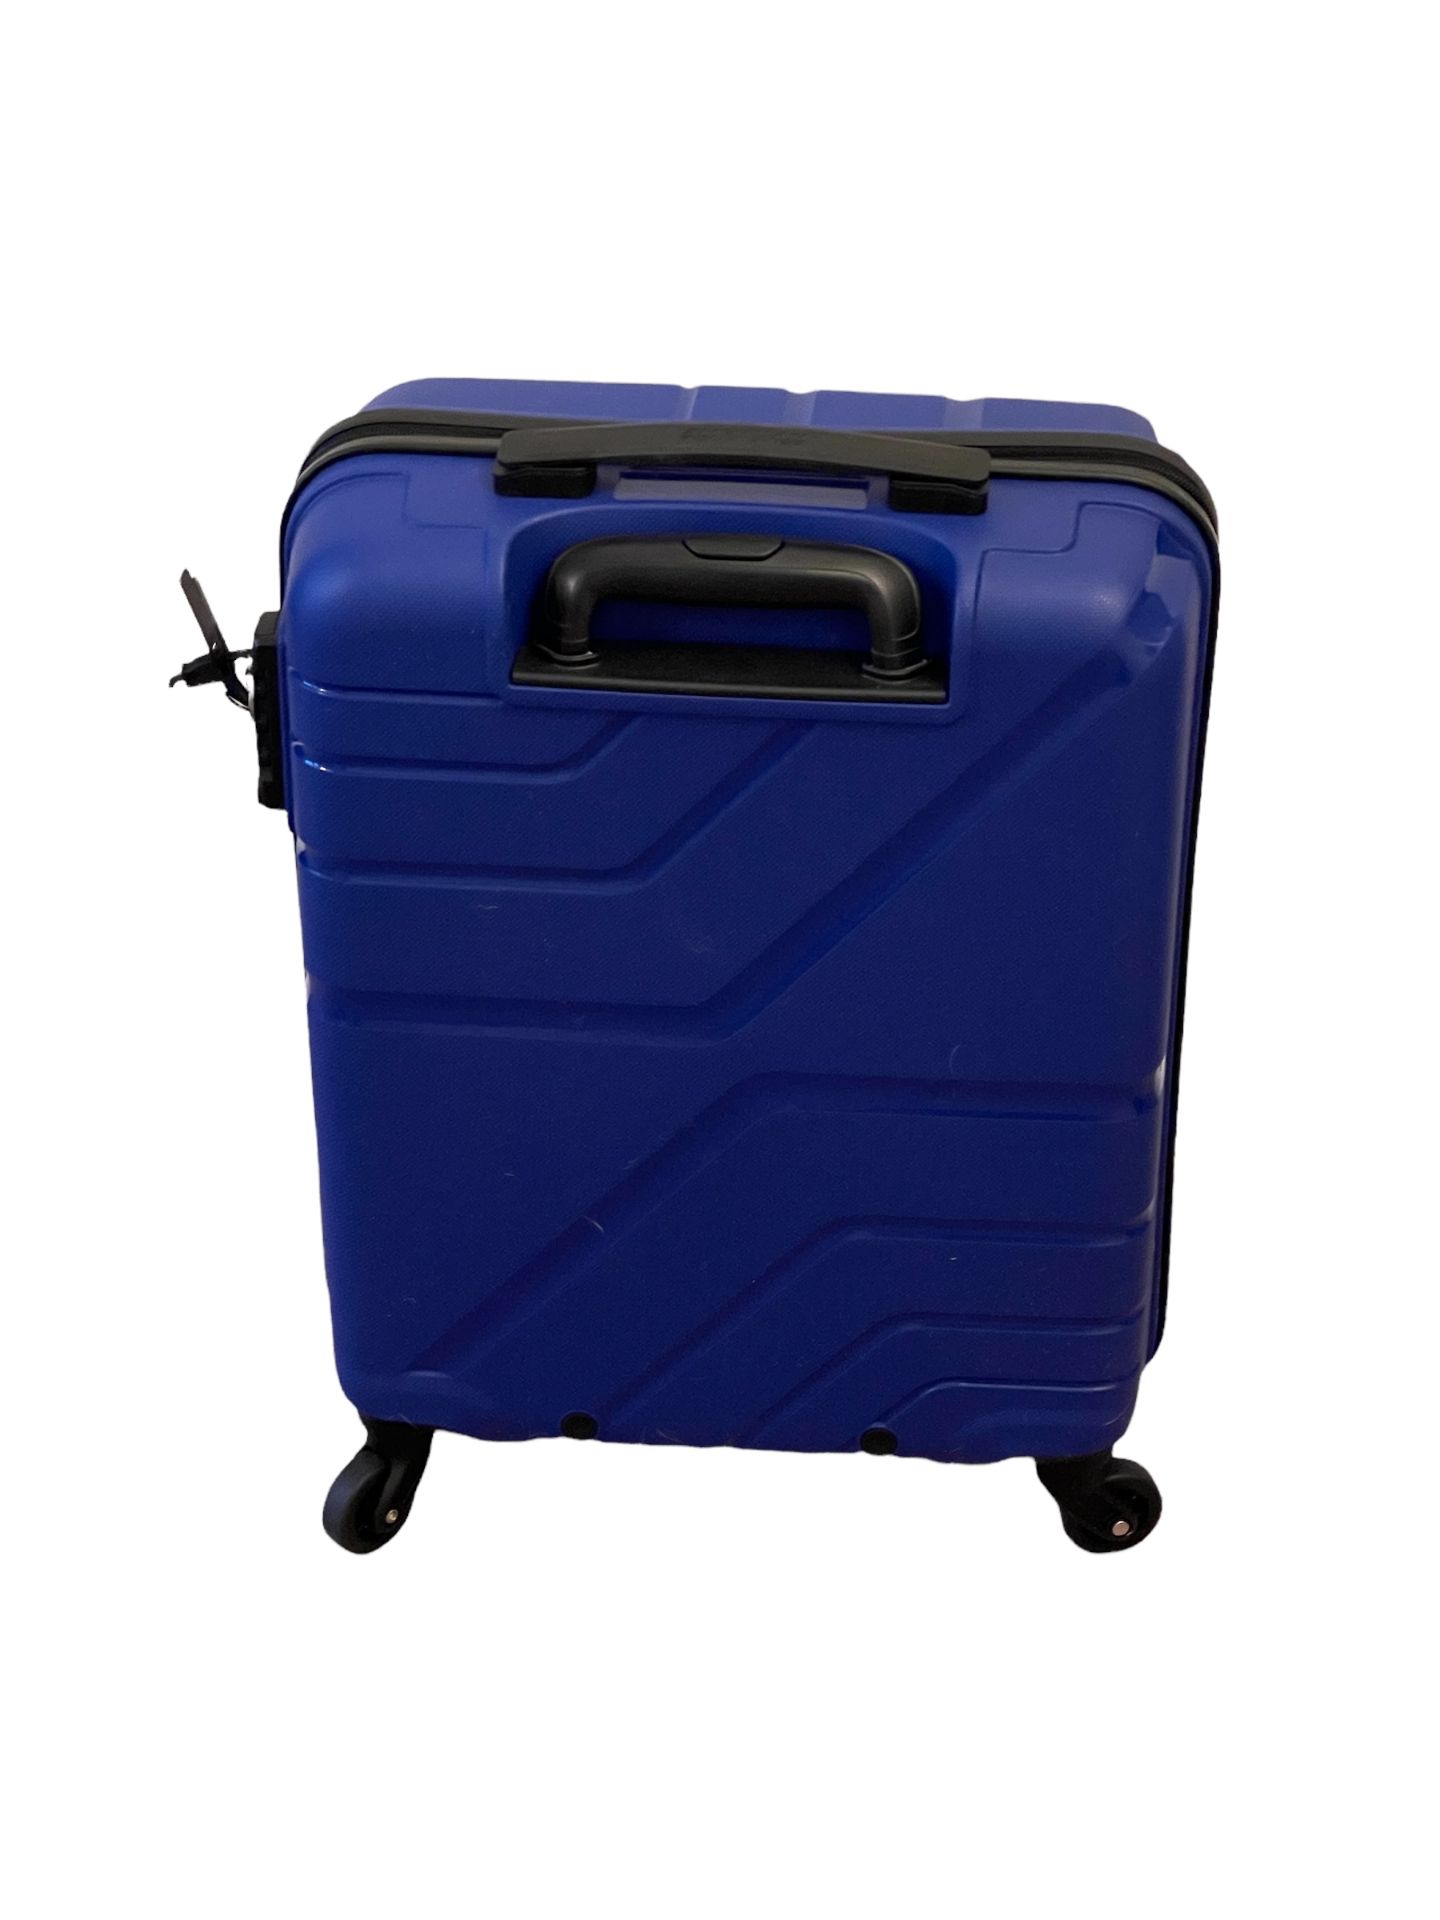 Lost Property - American Cabin Luggage, Contains Representative Display of Watches, Elite Drone etc. - Image 2 of 7